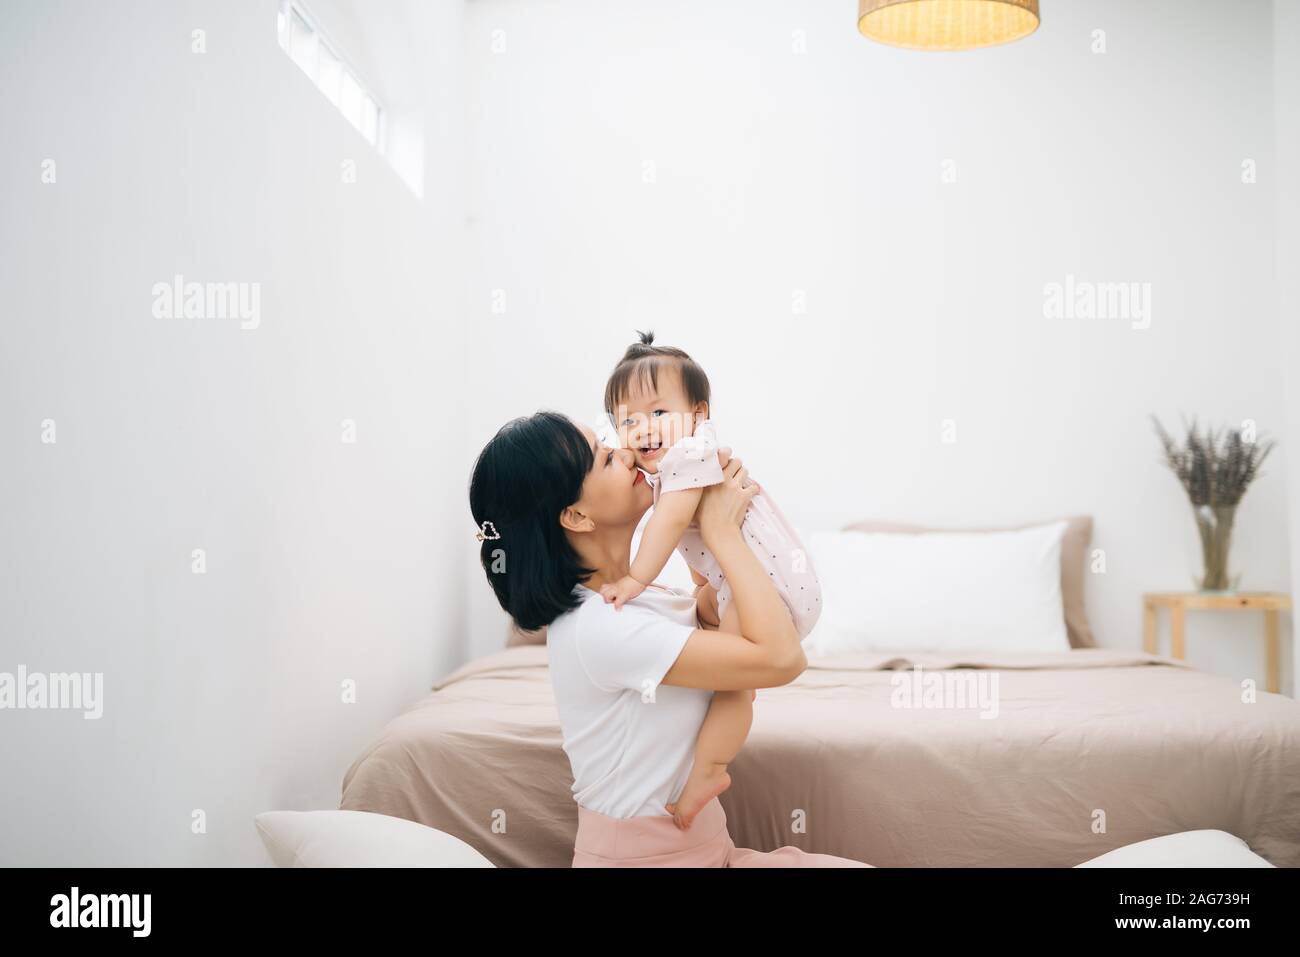 asian mother and child relaxing on the bed room Stock Photo